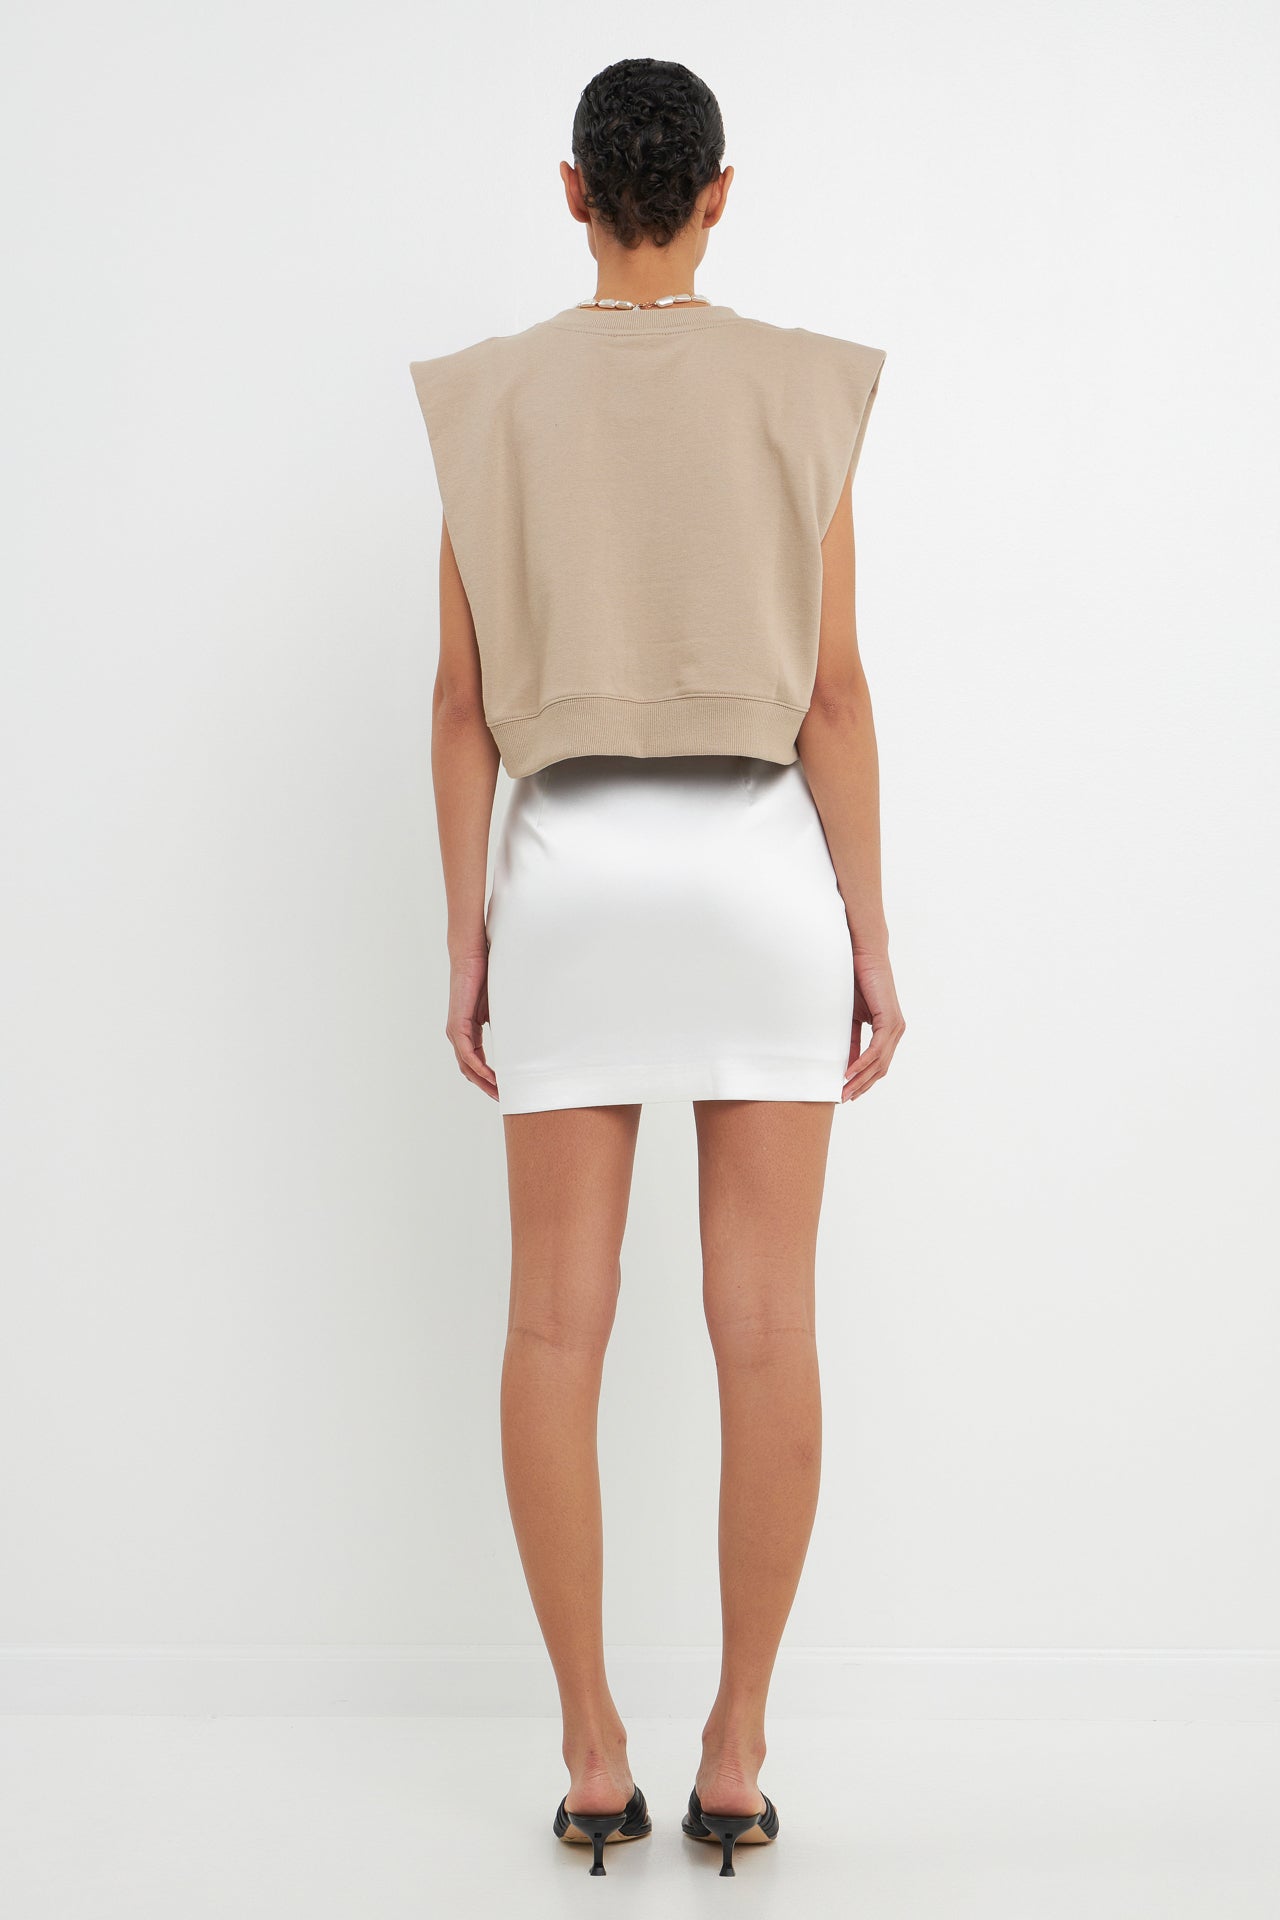 GREY LAB-Solid Satin Fit Mini-SKIRTS available at Objectrare